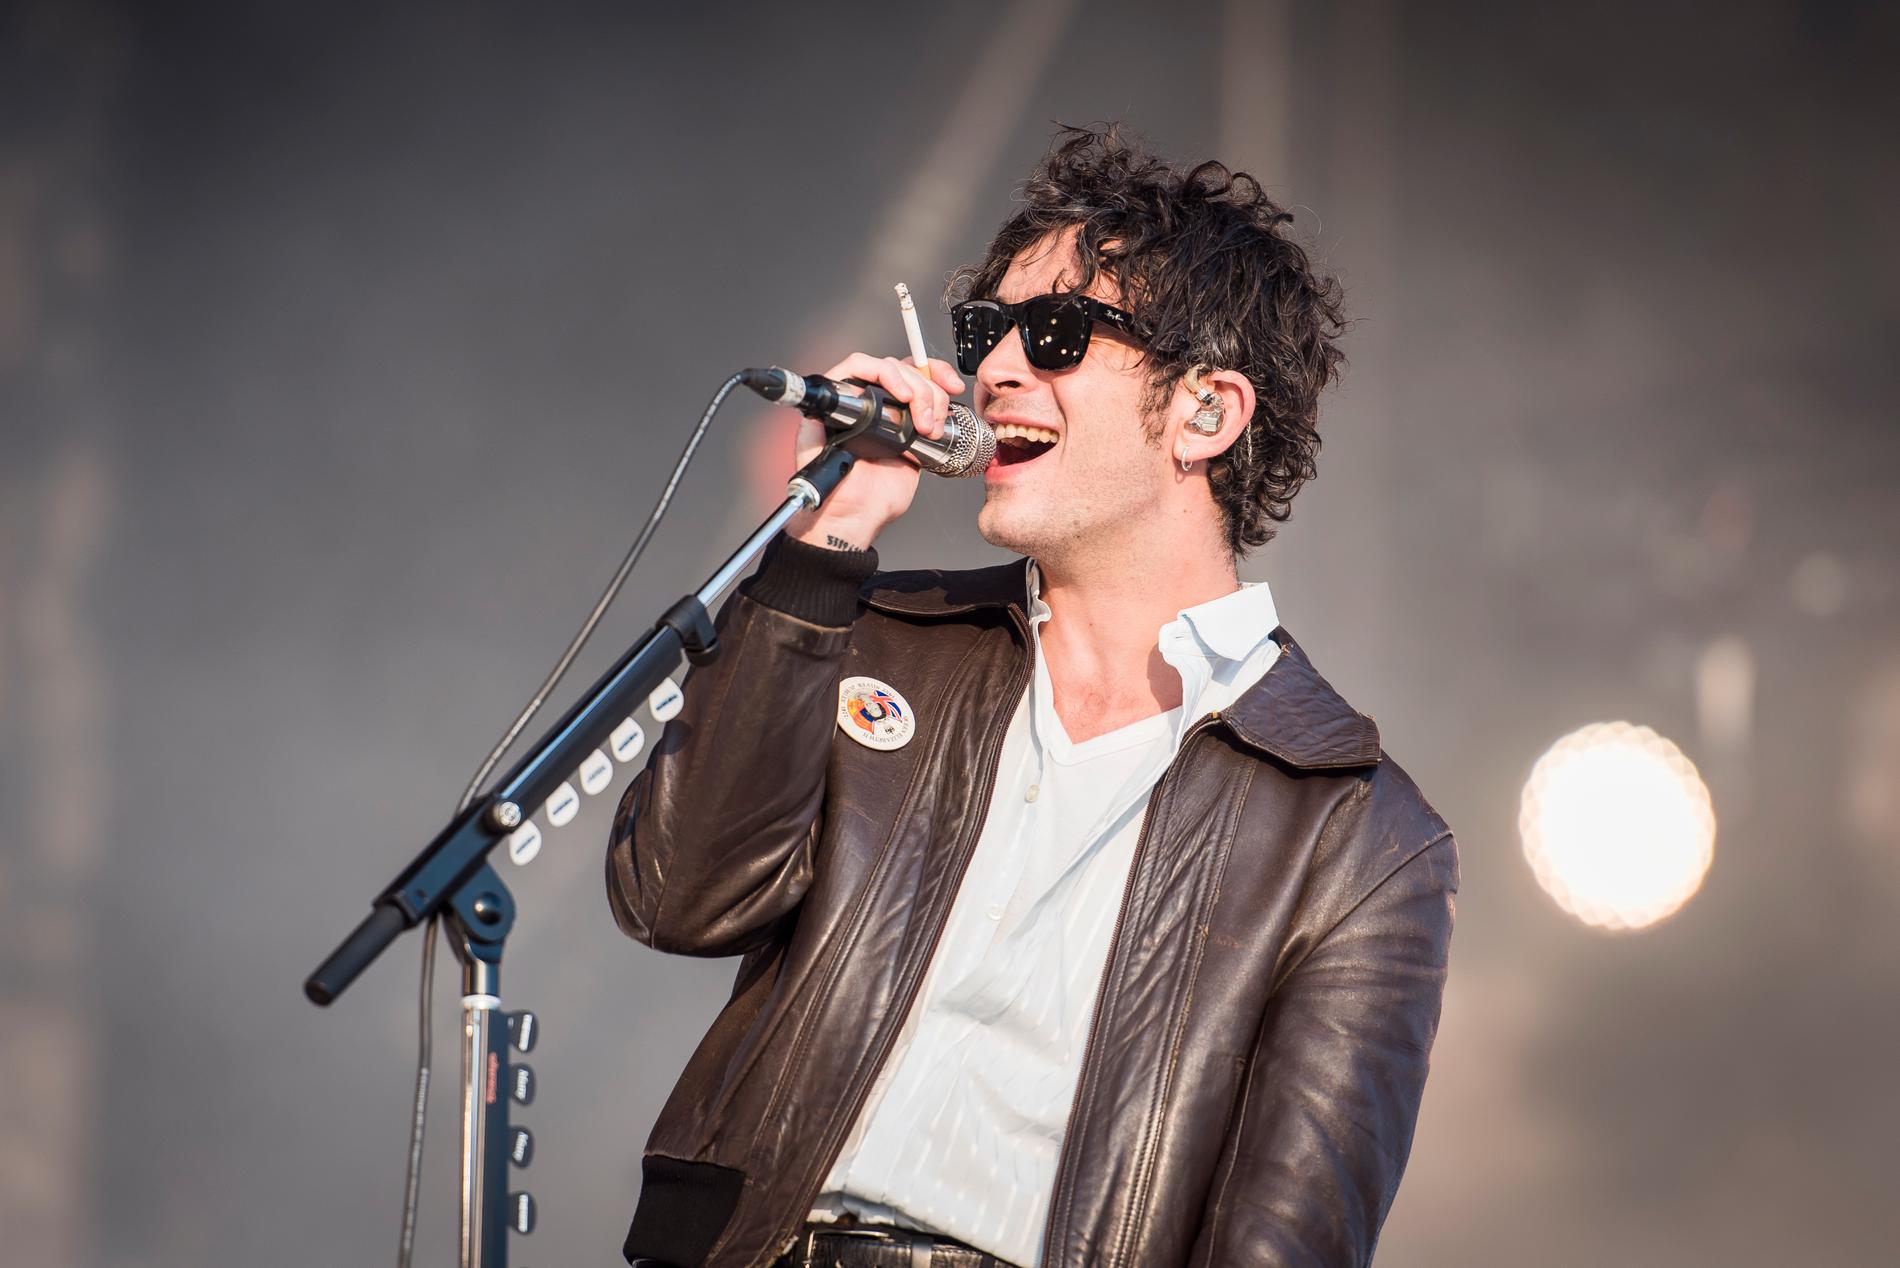 The 1975 at Tele 2 Arena